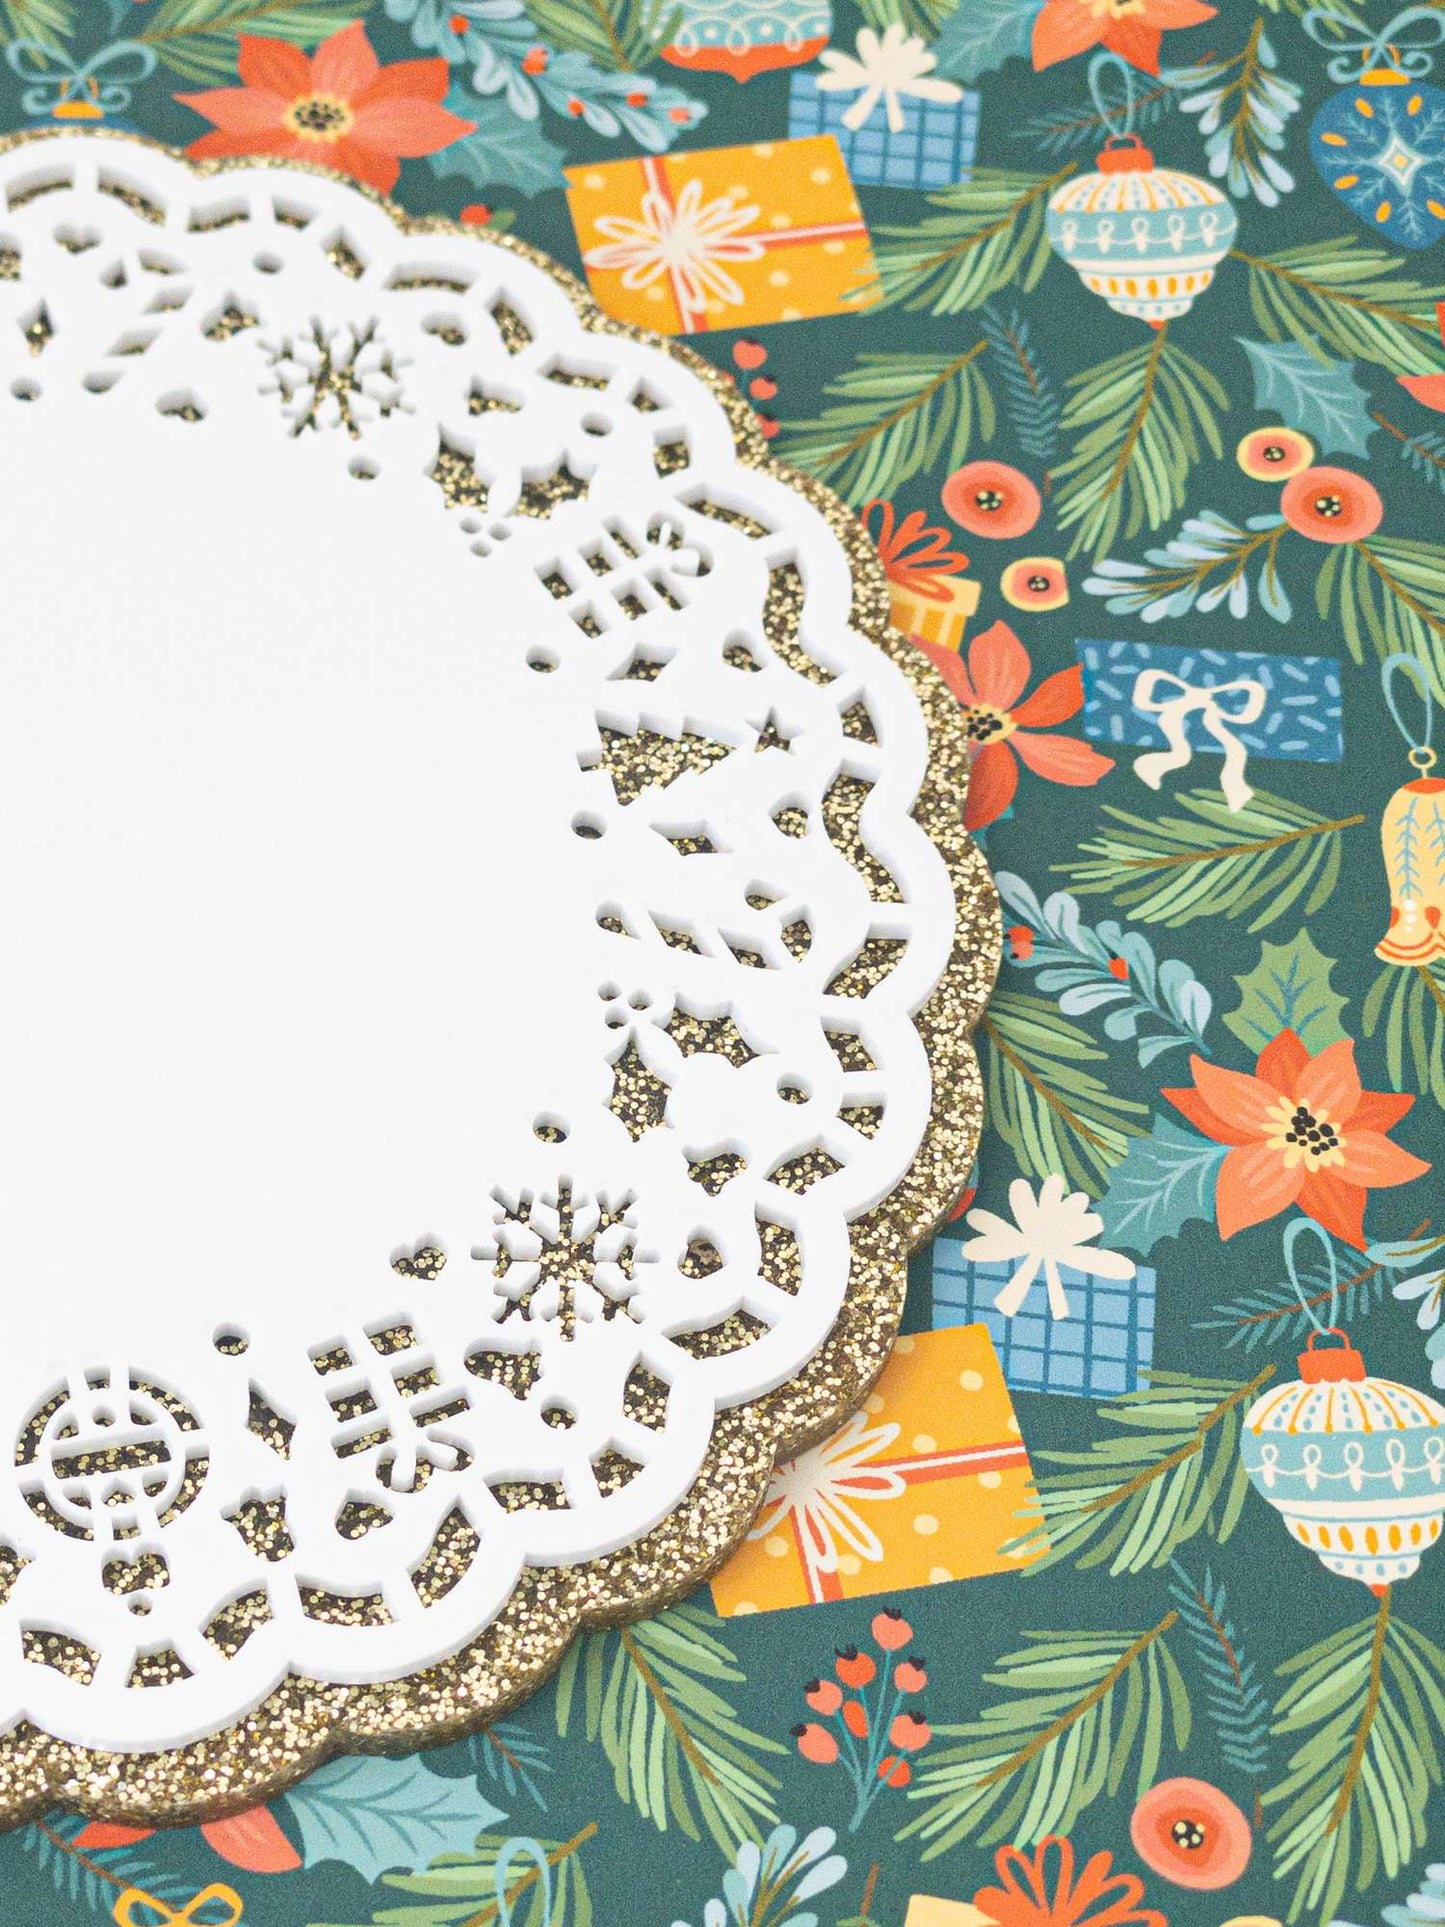 Pack of Christmas Doily Coasters